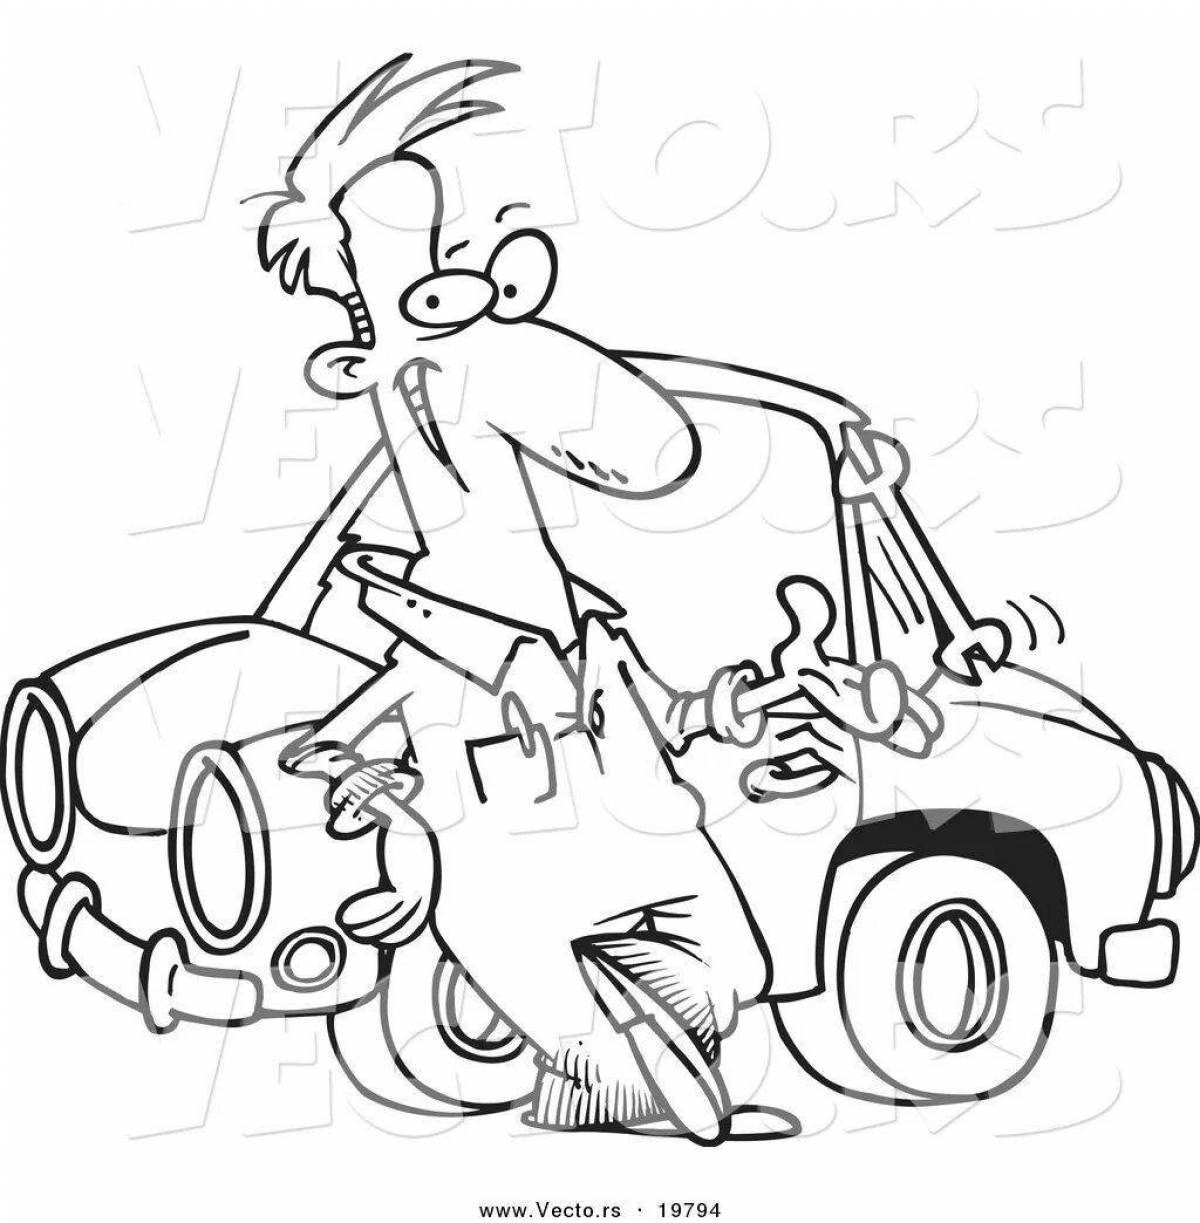 Animated car mechanic coloring page for kids